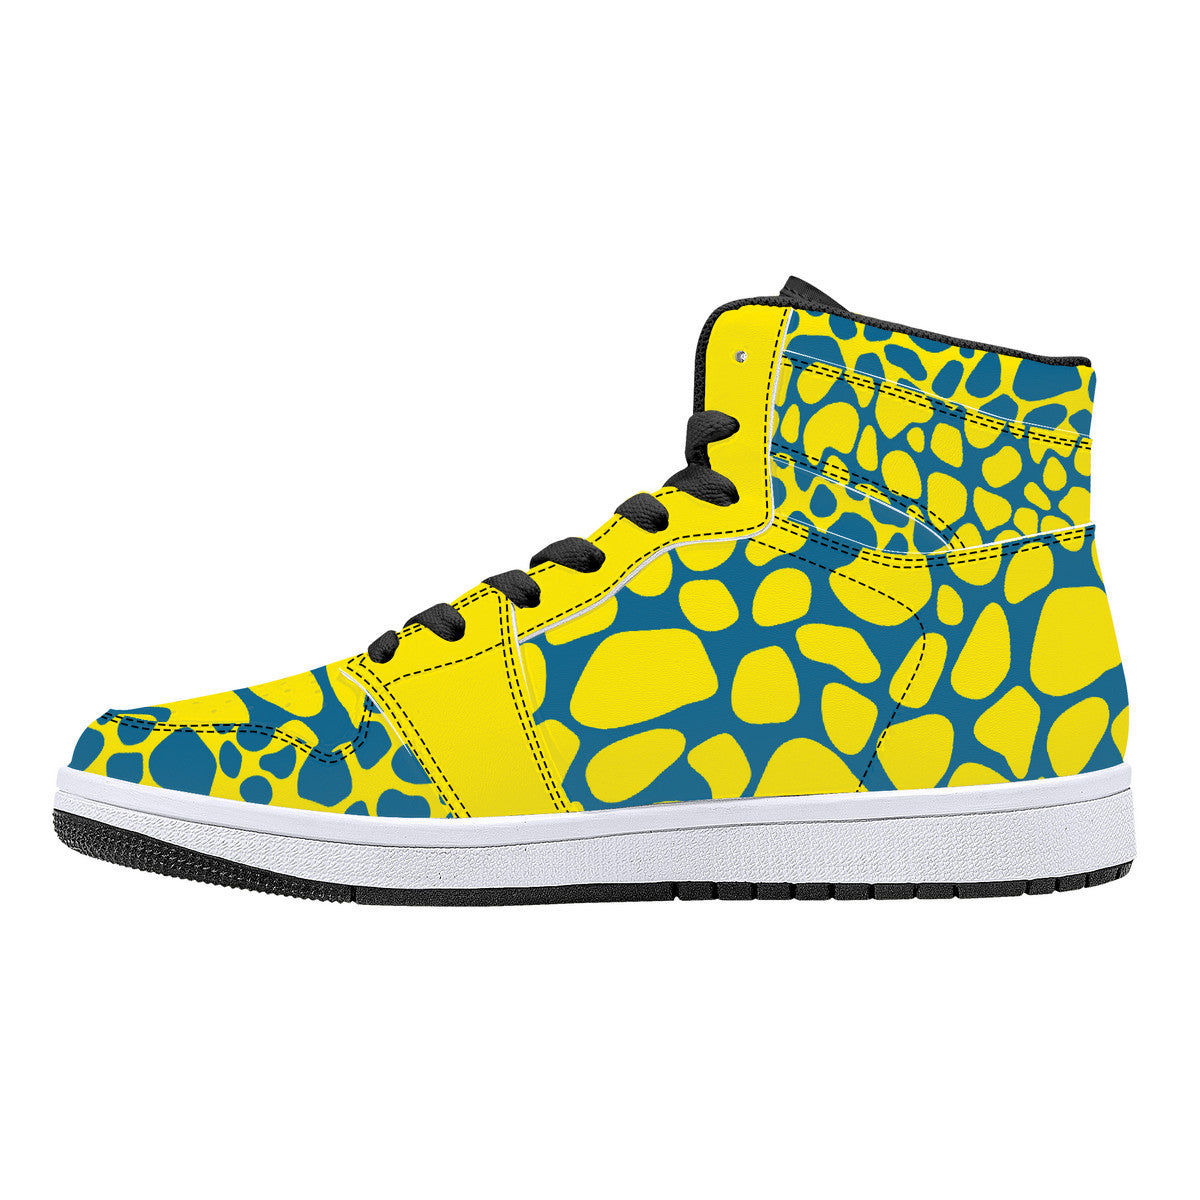 "Giraffe" High-Top Synthetic Leather Sneakers